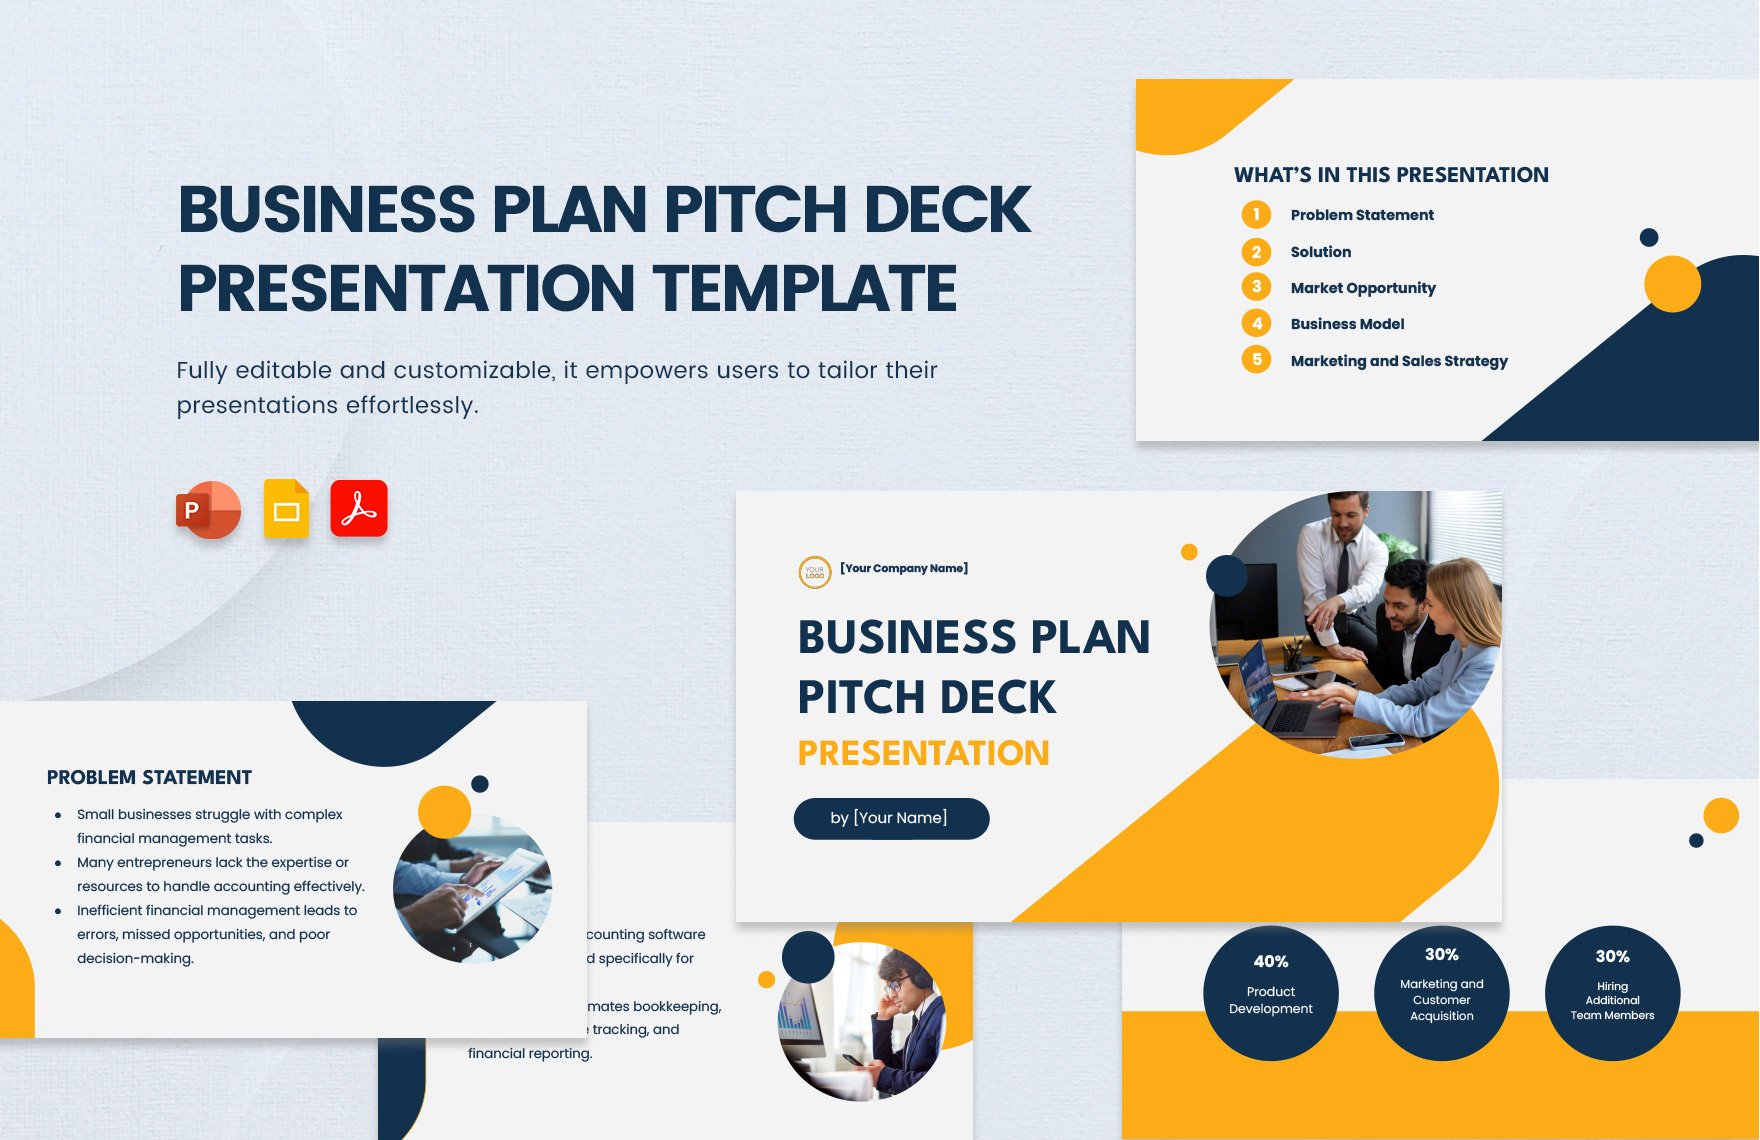 Free Business Plan Pitch Deck Presentation Template in PDF, PowerPoint, Google Slides